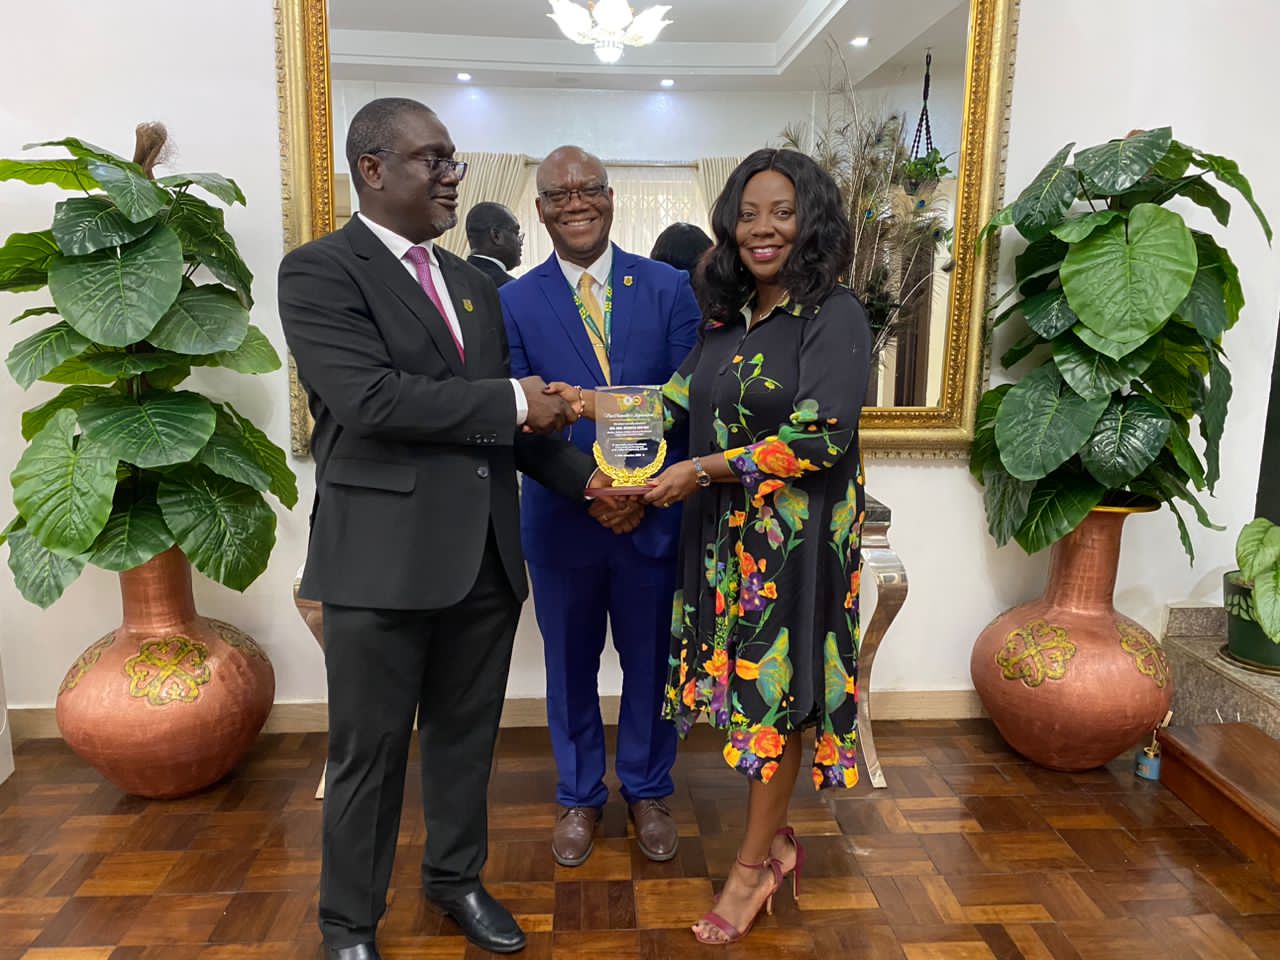 Ing. Mrs. Patricia Obo-Nai, Industry Advisory Board Member, KEEP, received a plaque from Prof. Kwabena Nyarko for her outstanding service to KEEP